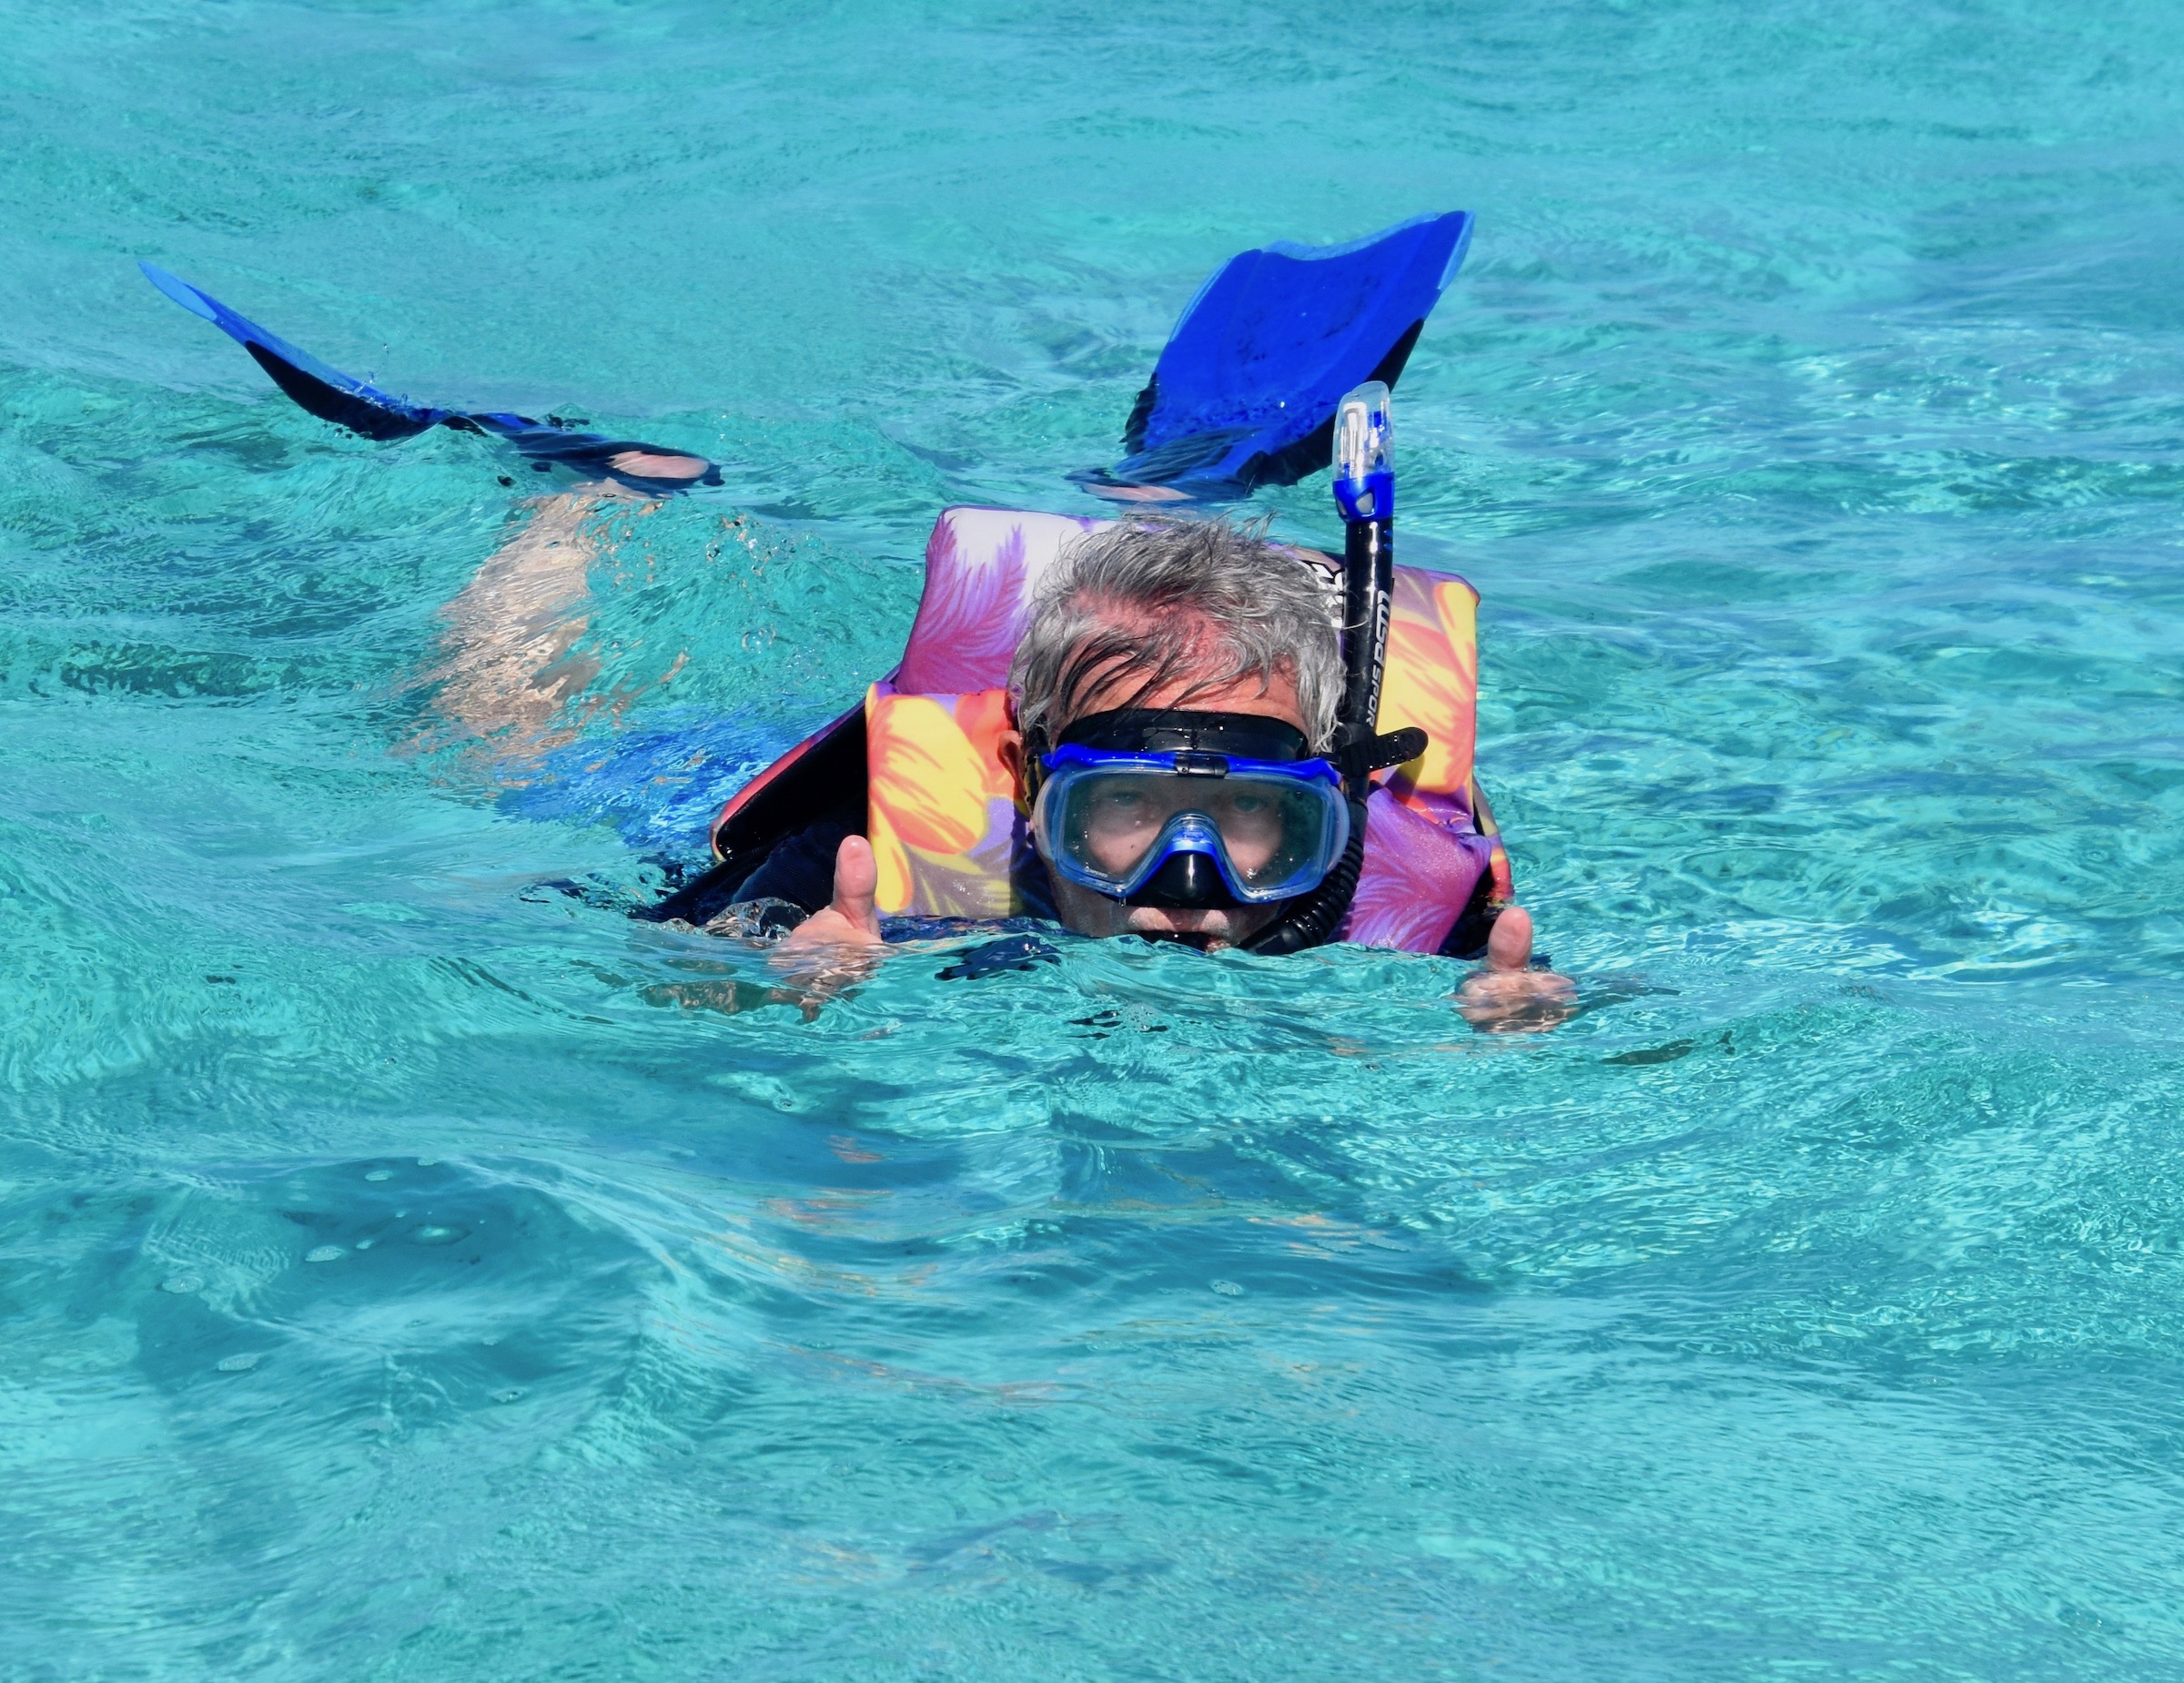 Snorkelling while seeing Bora Bora by Boat